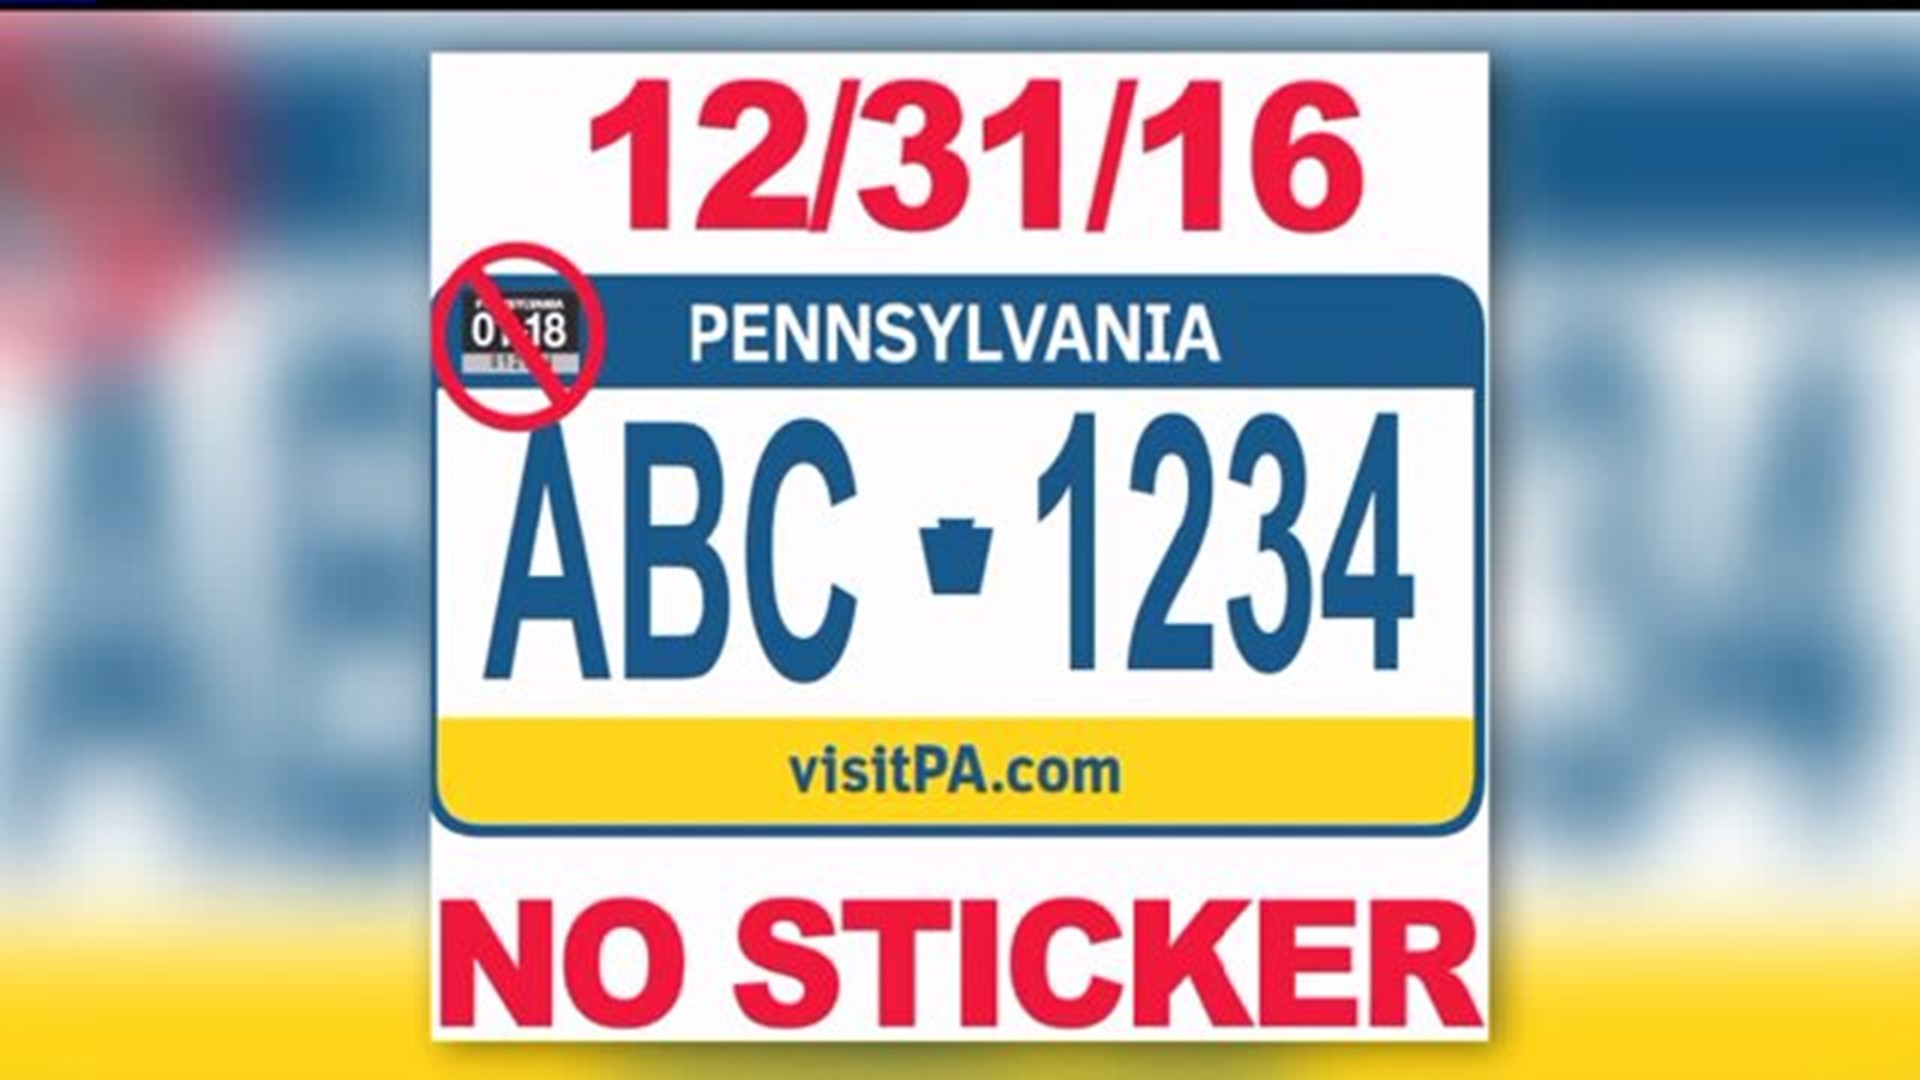 Eliminating the registration sticker saves PA money, so where is that extra cash going now?